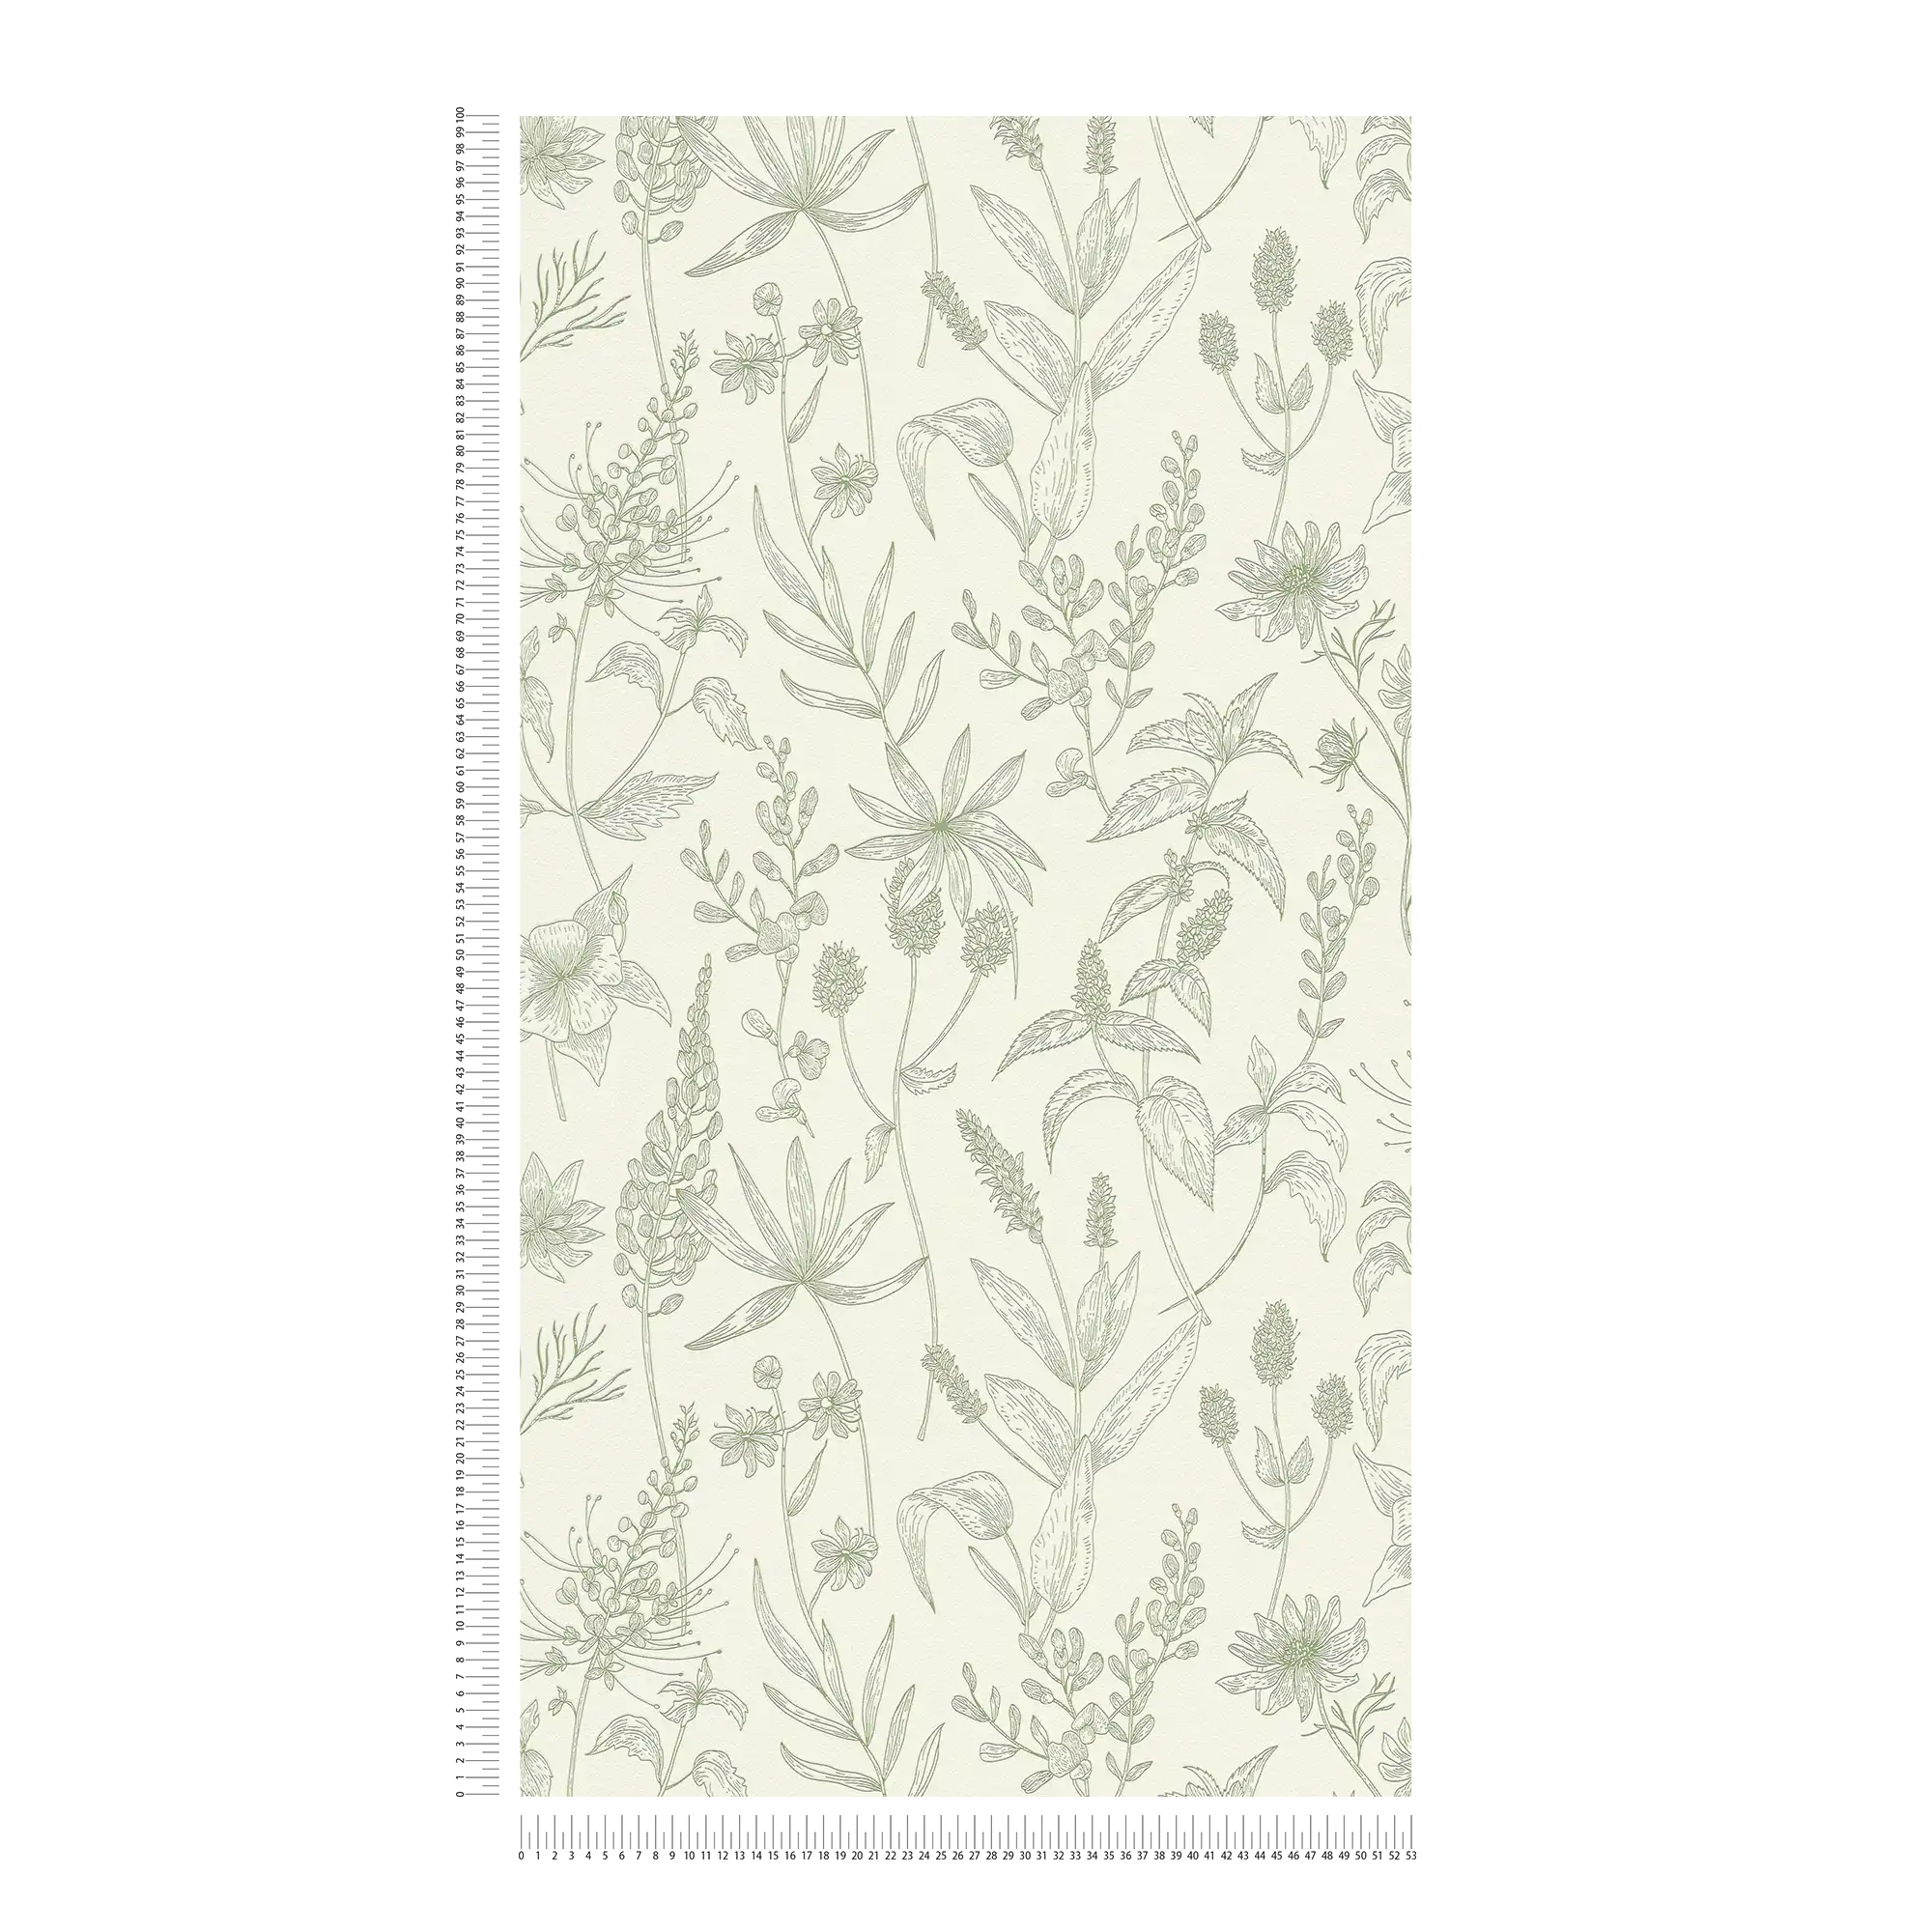             Non-woven wallpaper with floral pattern and metallic accent - green, silver, white
        